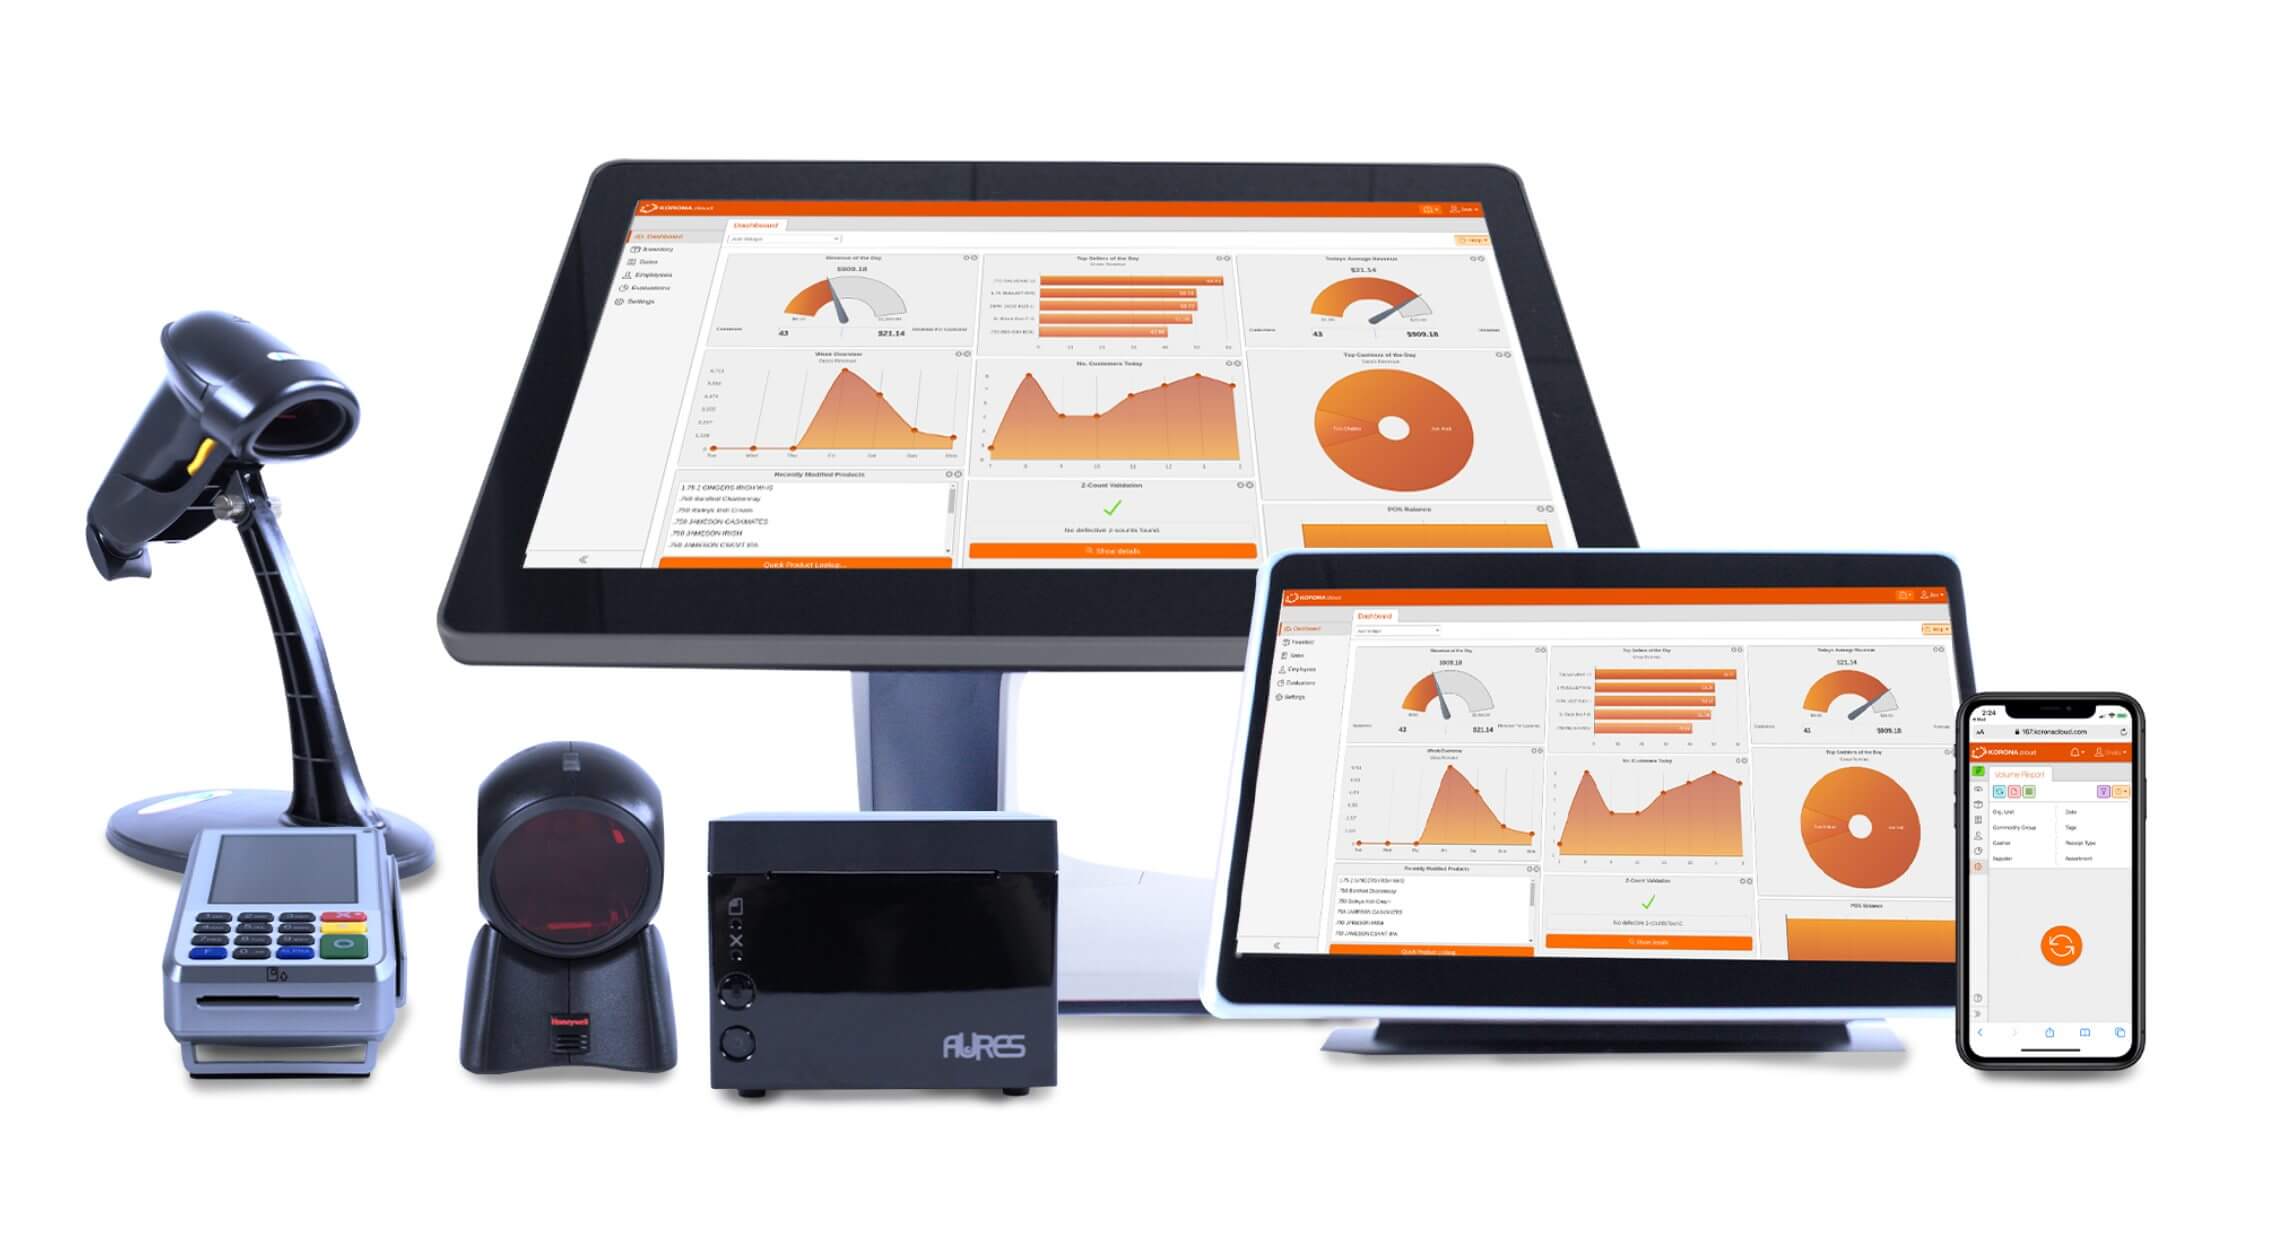 Image of POS hardware group including desktop, tablet, iphone, printer, scanners, and credit card machine; and features backend analytics screen.